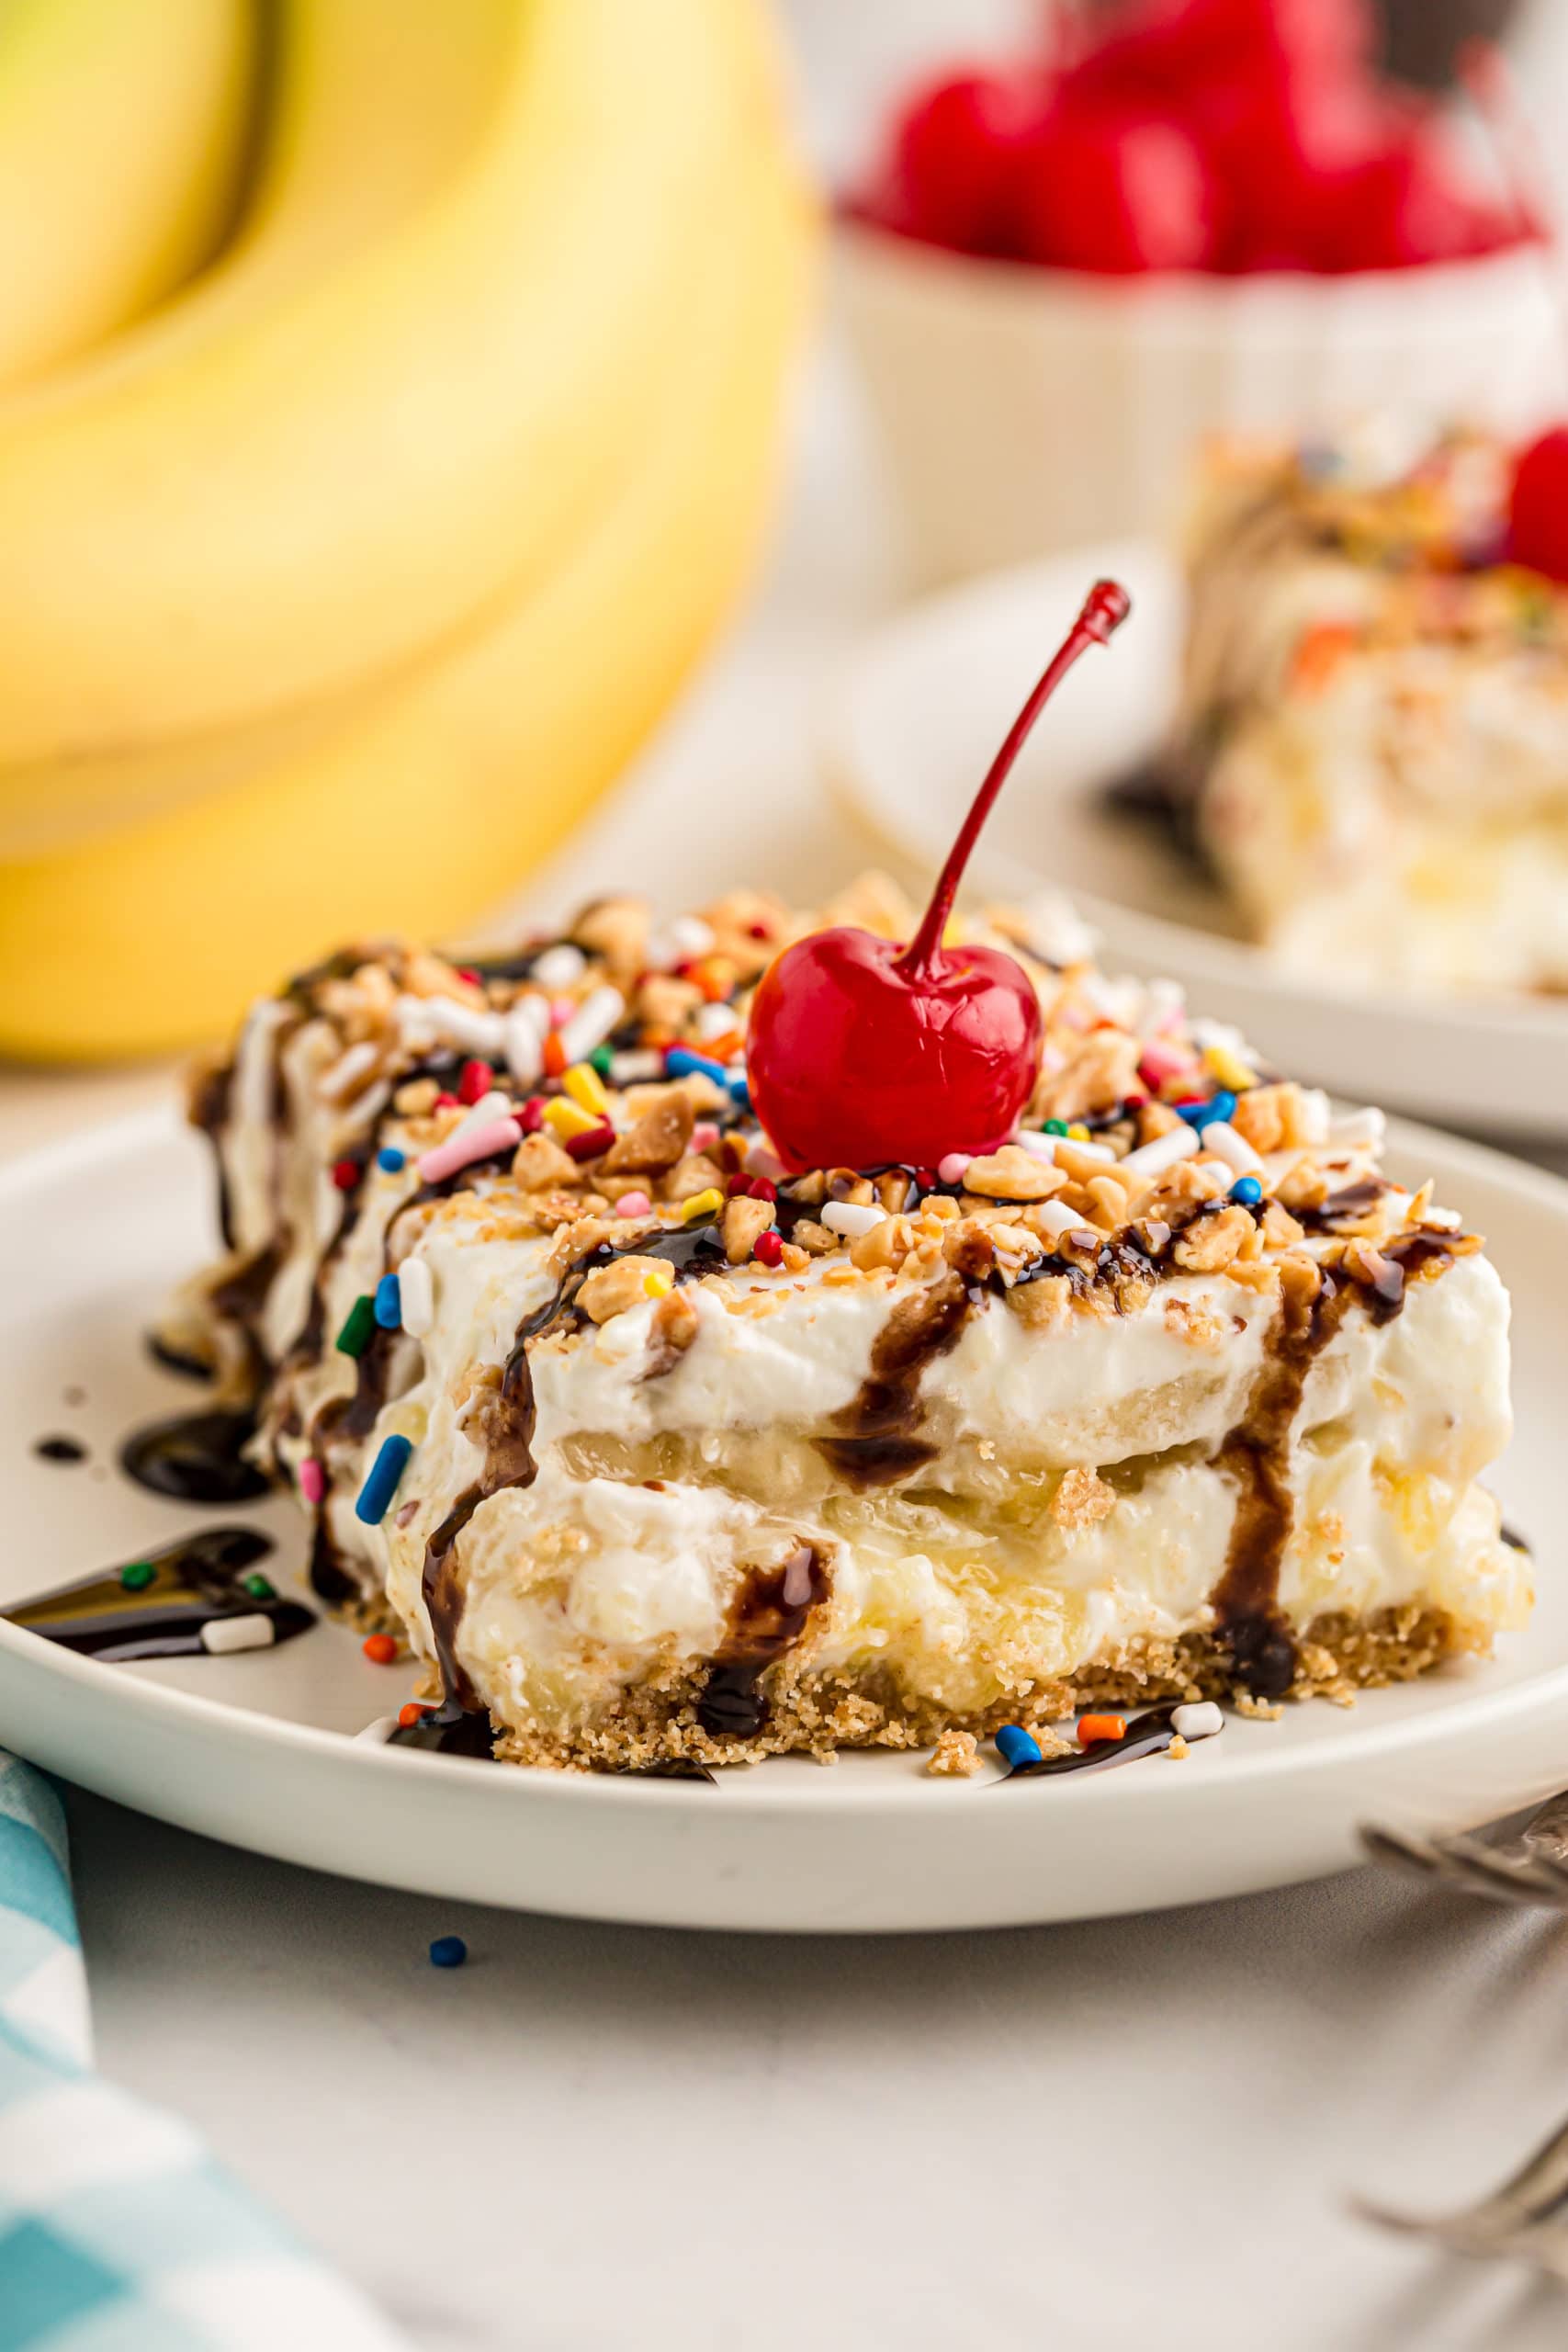 Slice of banana split cake topped with cherry and chocolate syrup